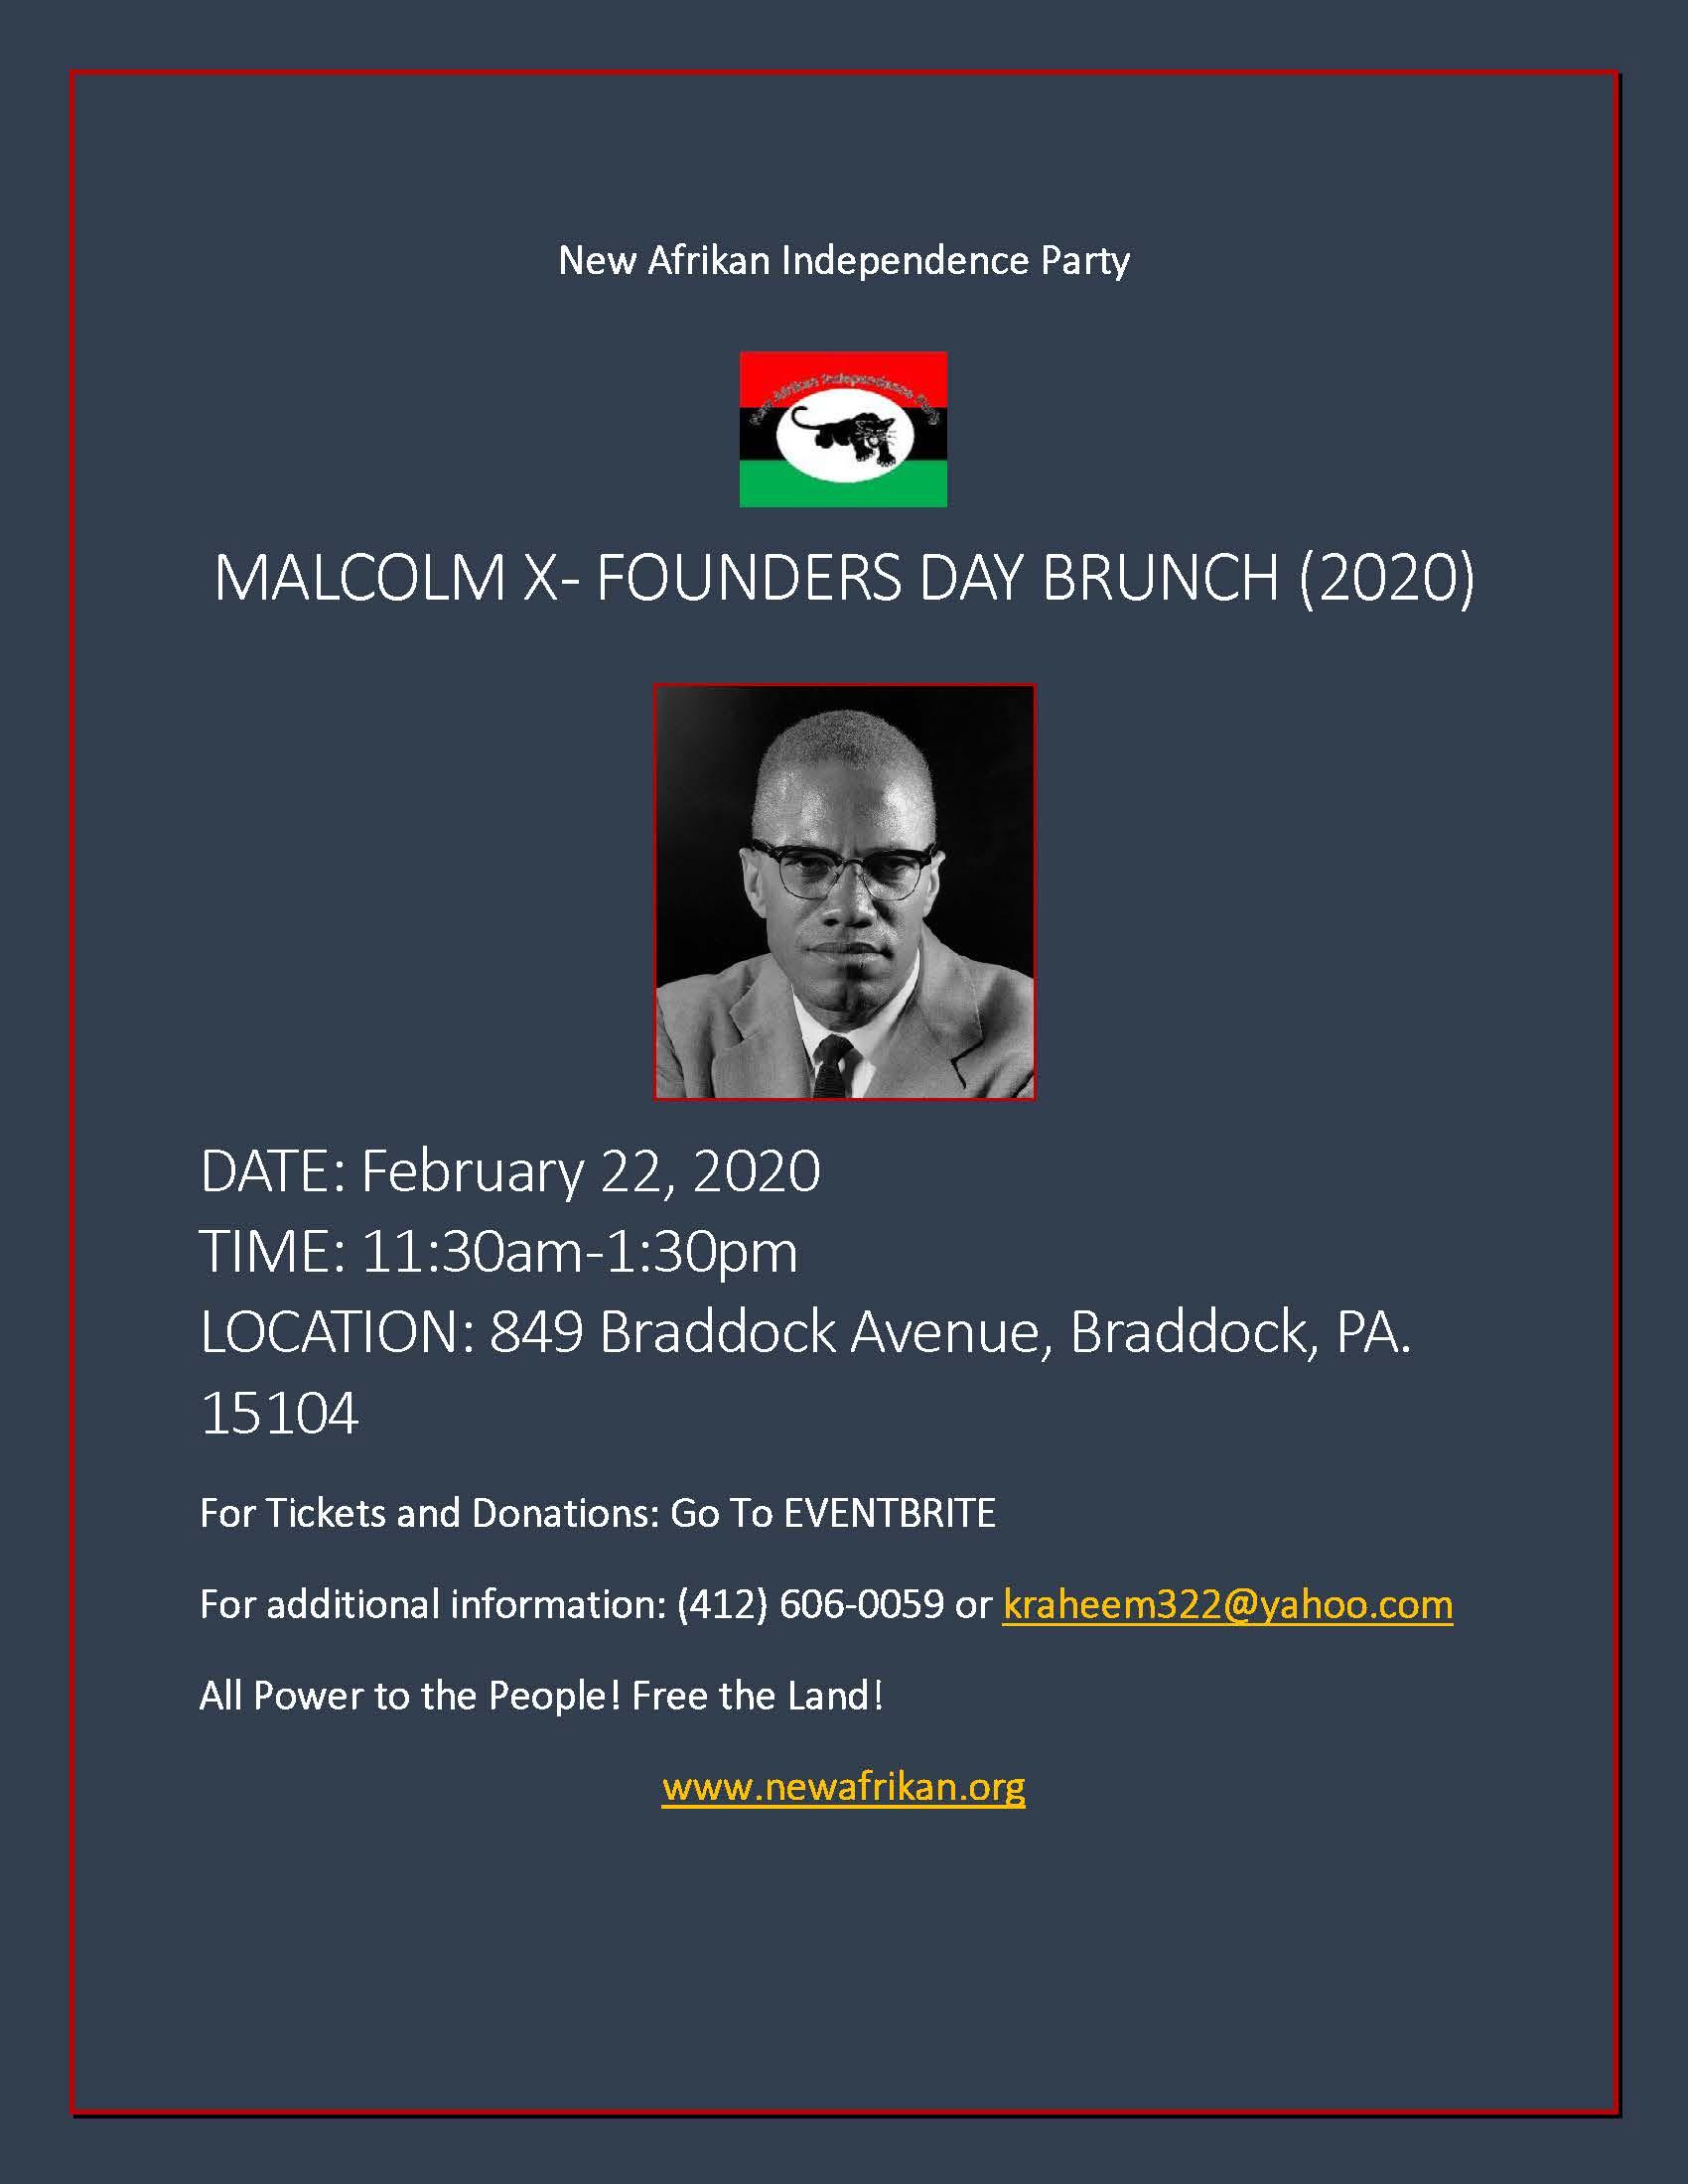 Malcolm X-Founders Day Brunch